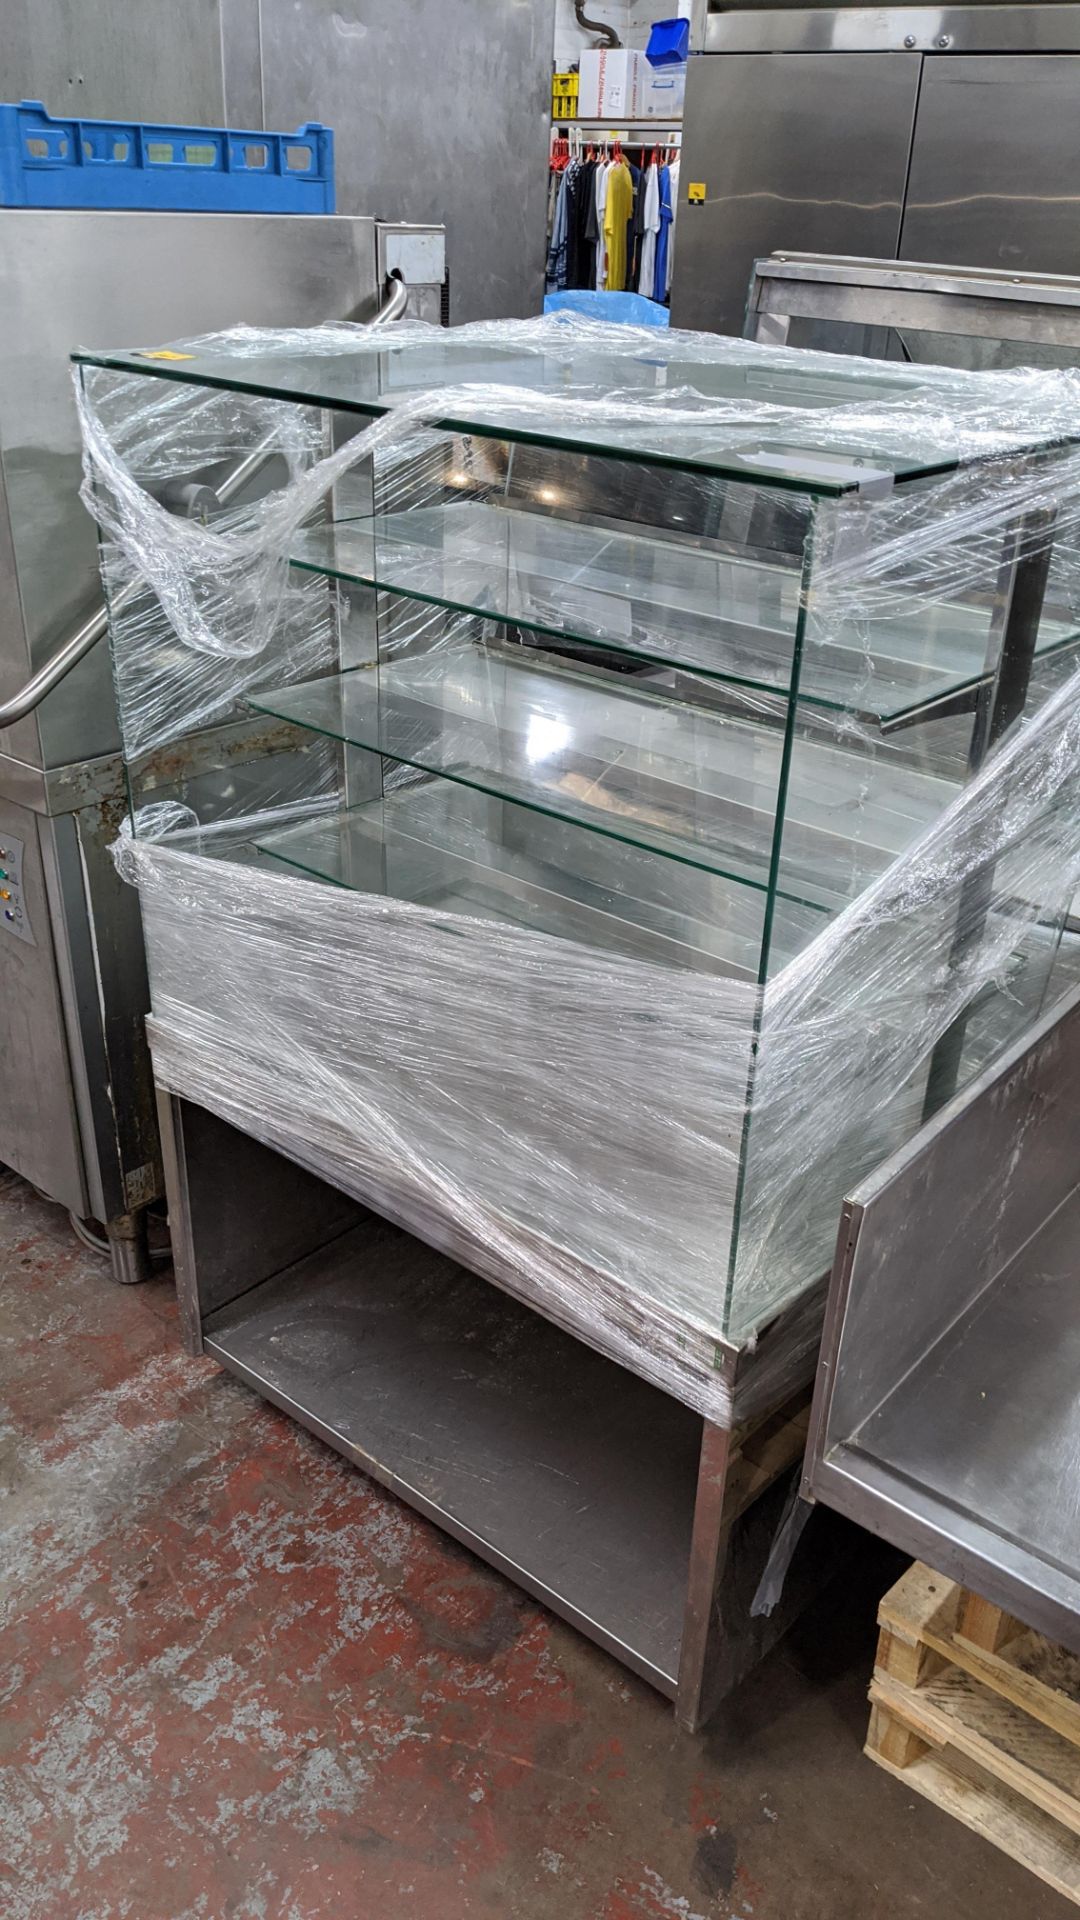 Stainless steel & glass display/serving unit, max external dimensions approximately 900mm x 670mm